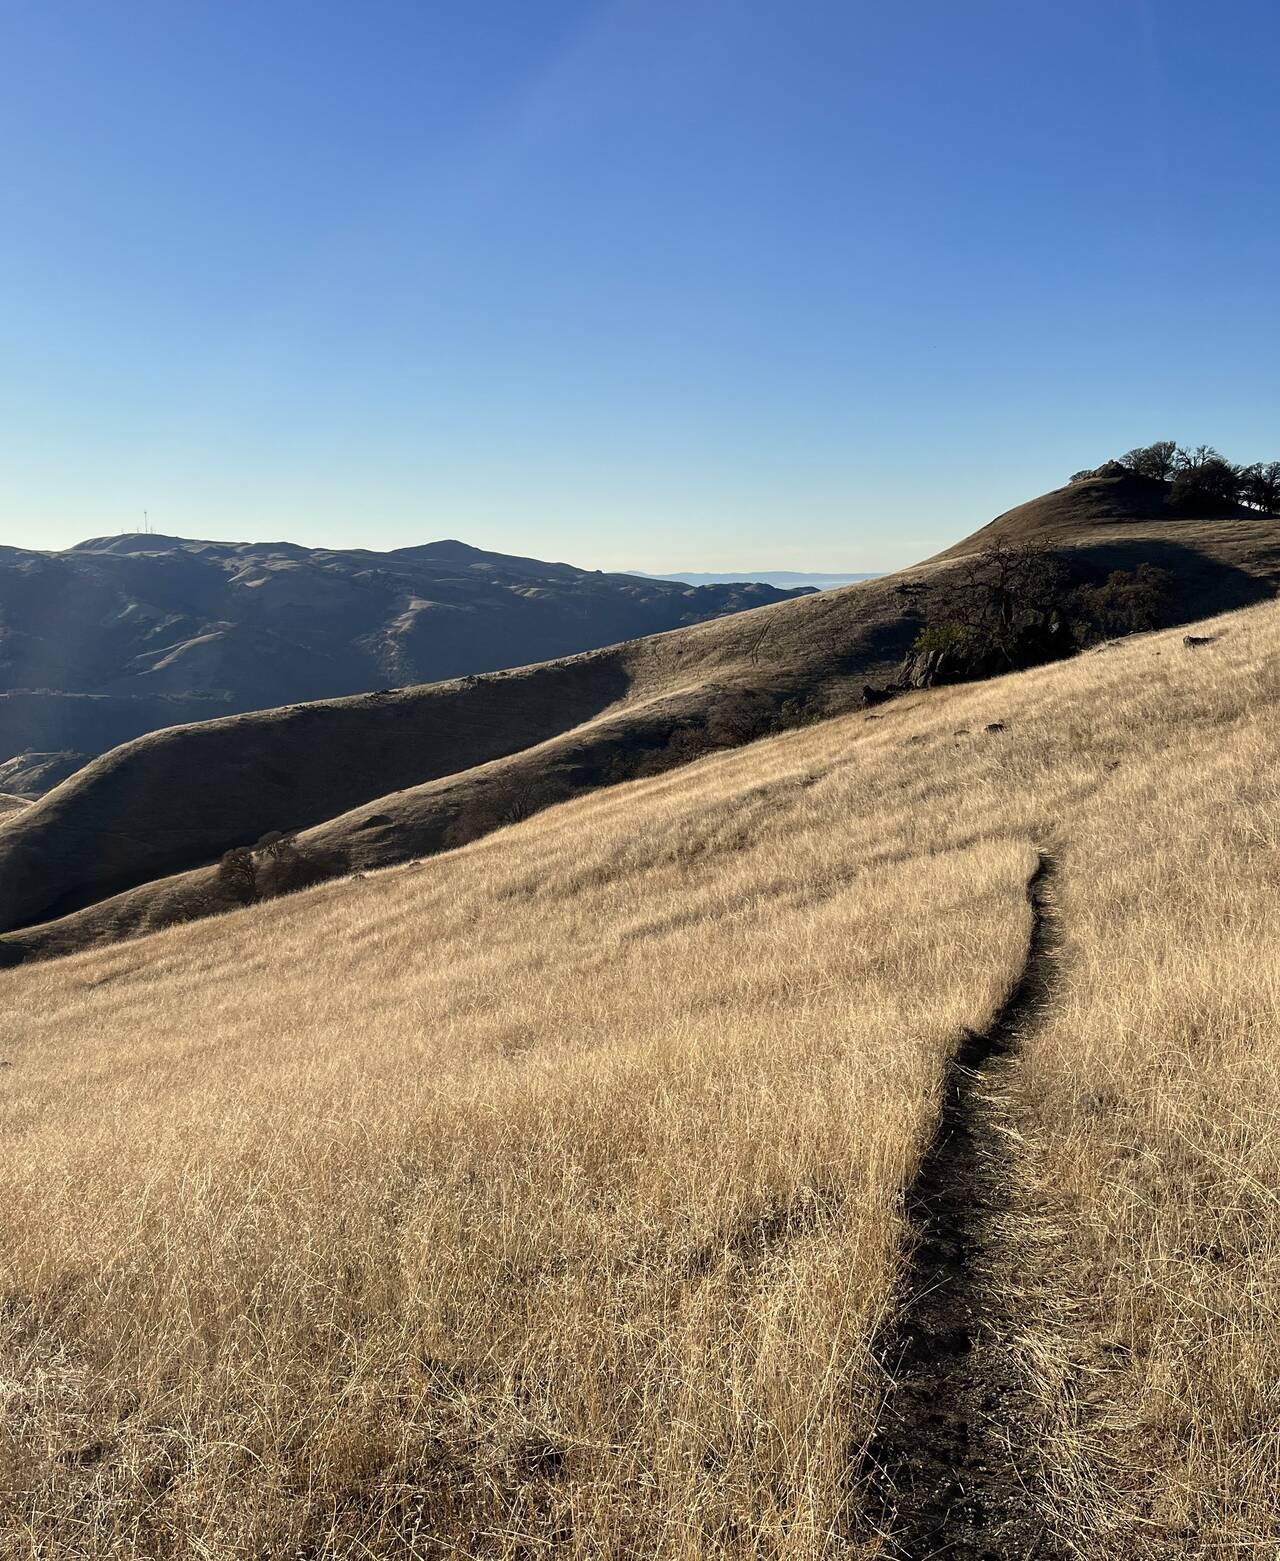 A single track path cuts across a hillside with Misson Peak now poking slightly above the horizon